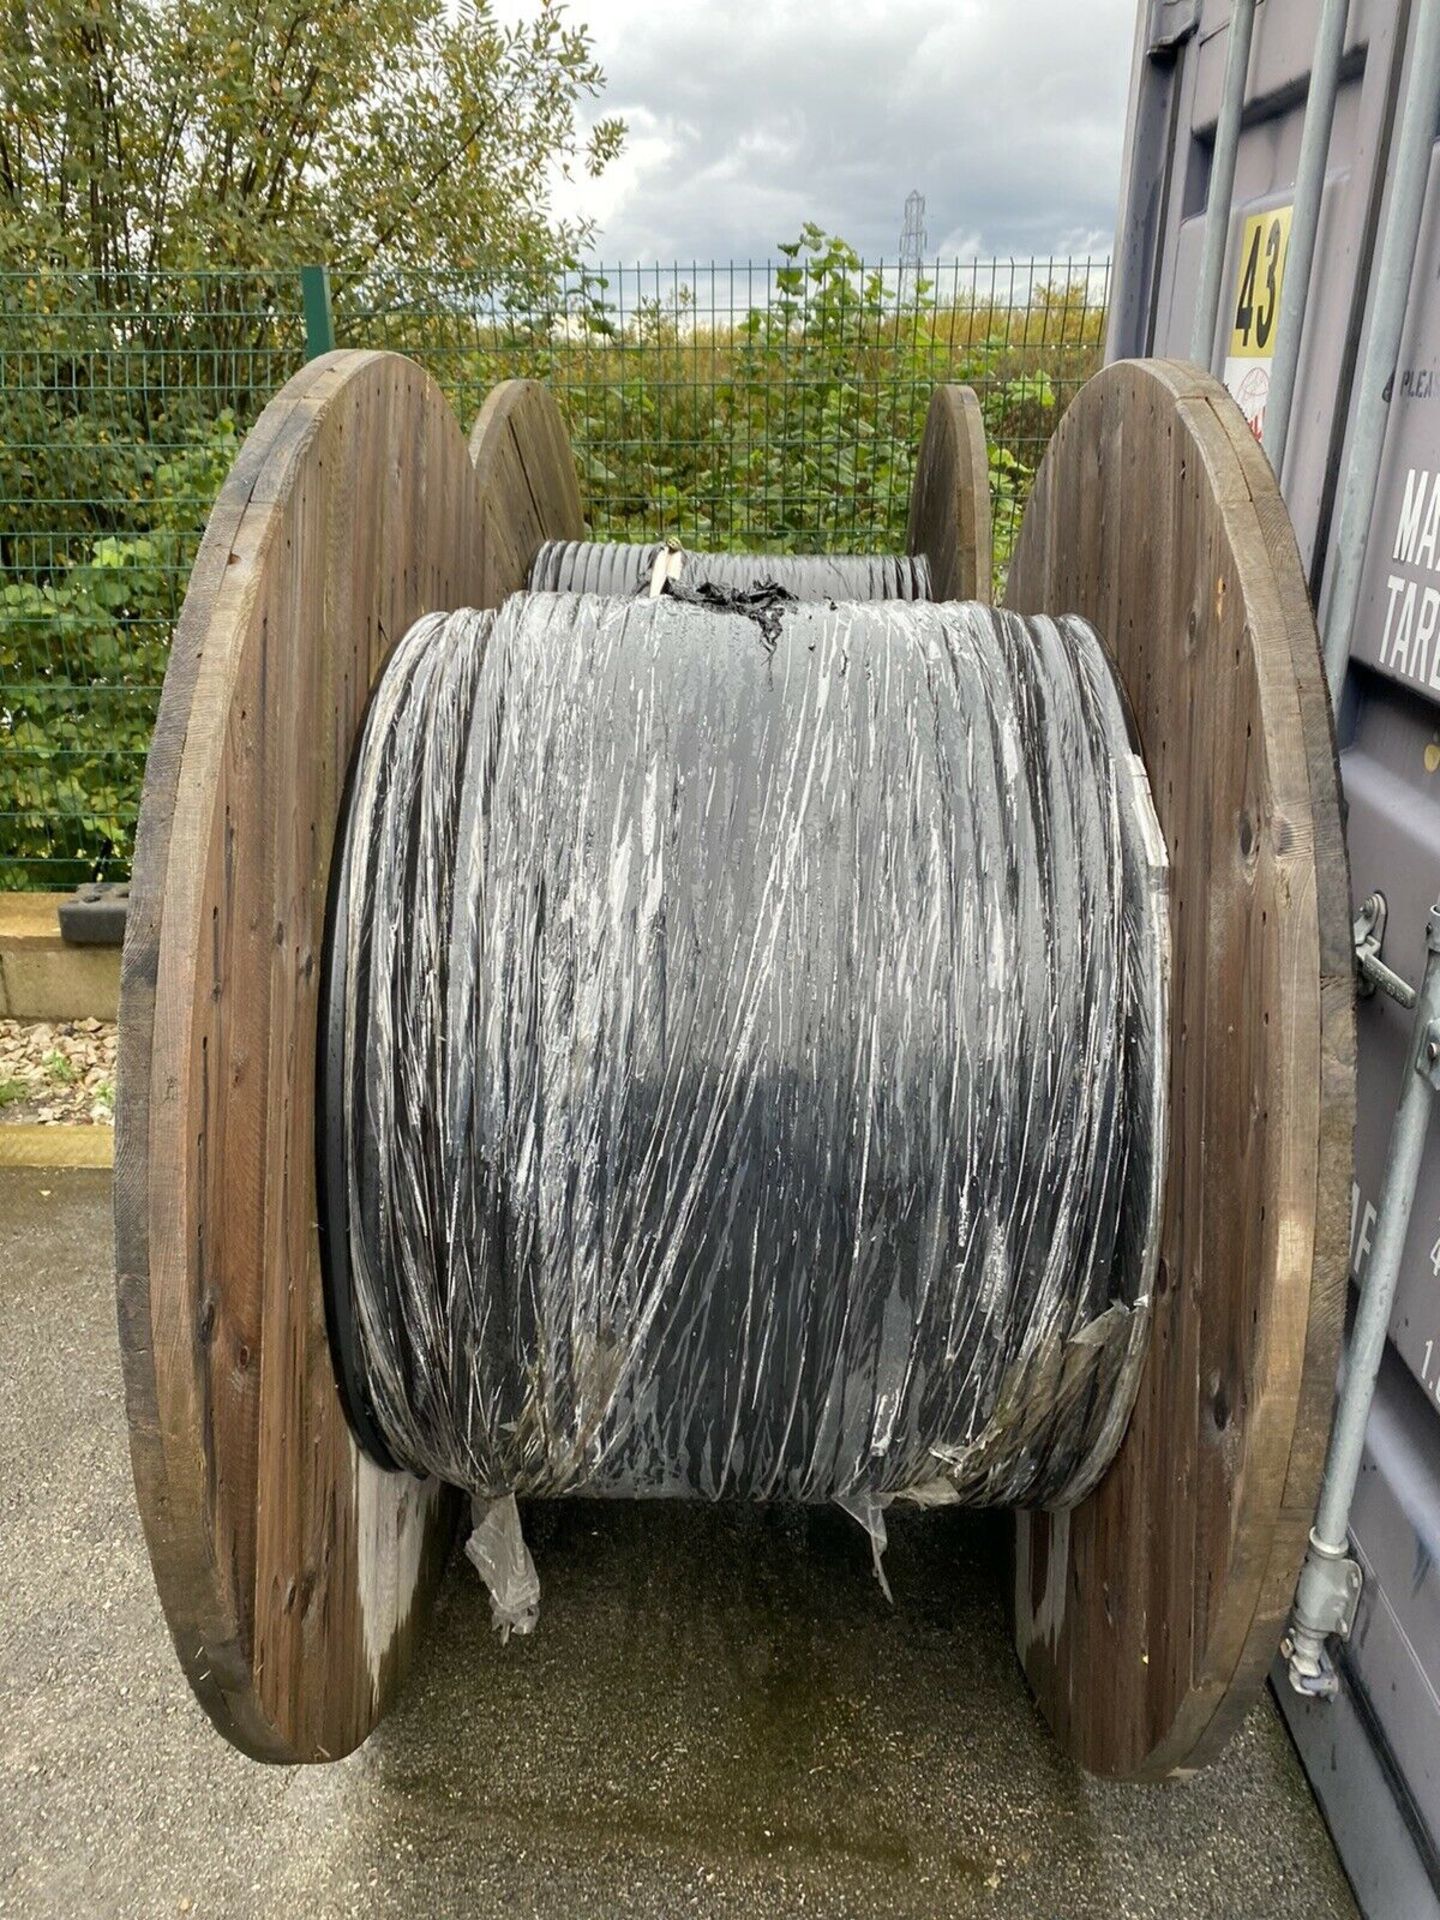 HDPE Ribbed Silicone 500m Drum Dura multi Blow Fibre Brand-Rex 7x10/8. NO RESERVE - Image 8 of 8